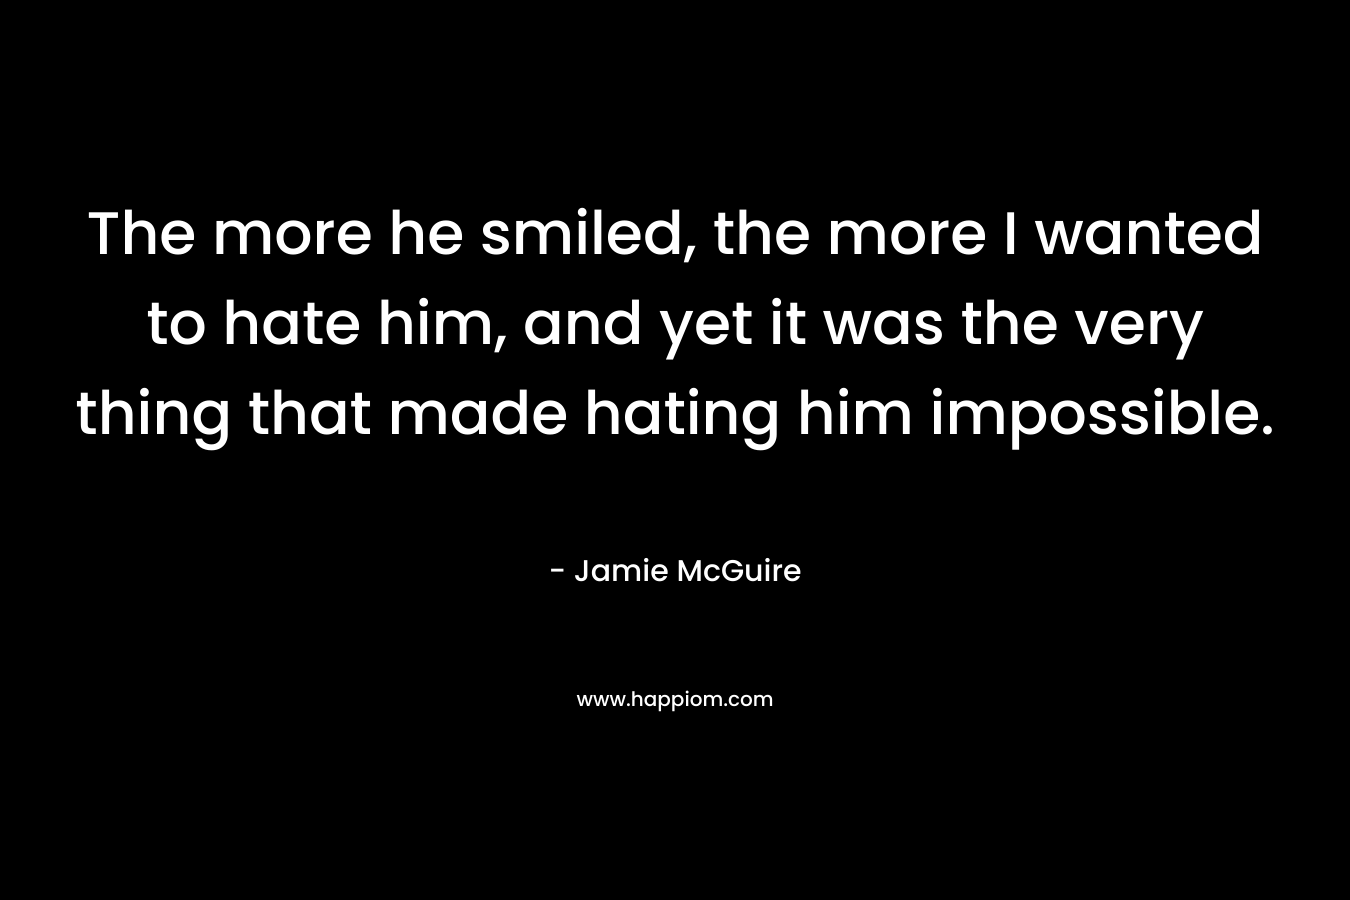 The more he smiled, the more I wanted to hate him, and yet it was the very thing that made hating him impossible.